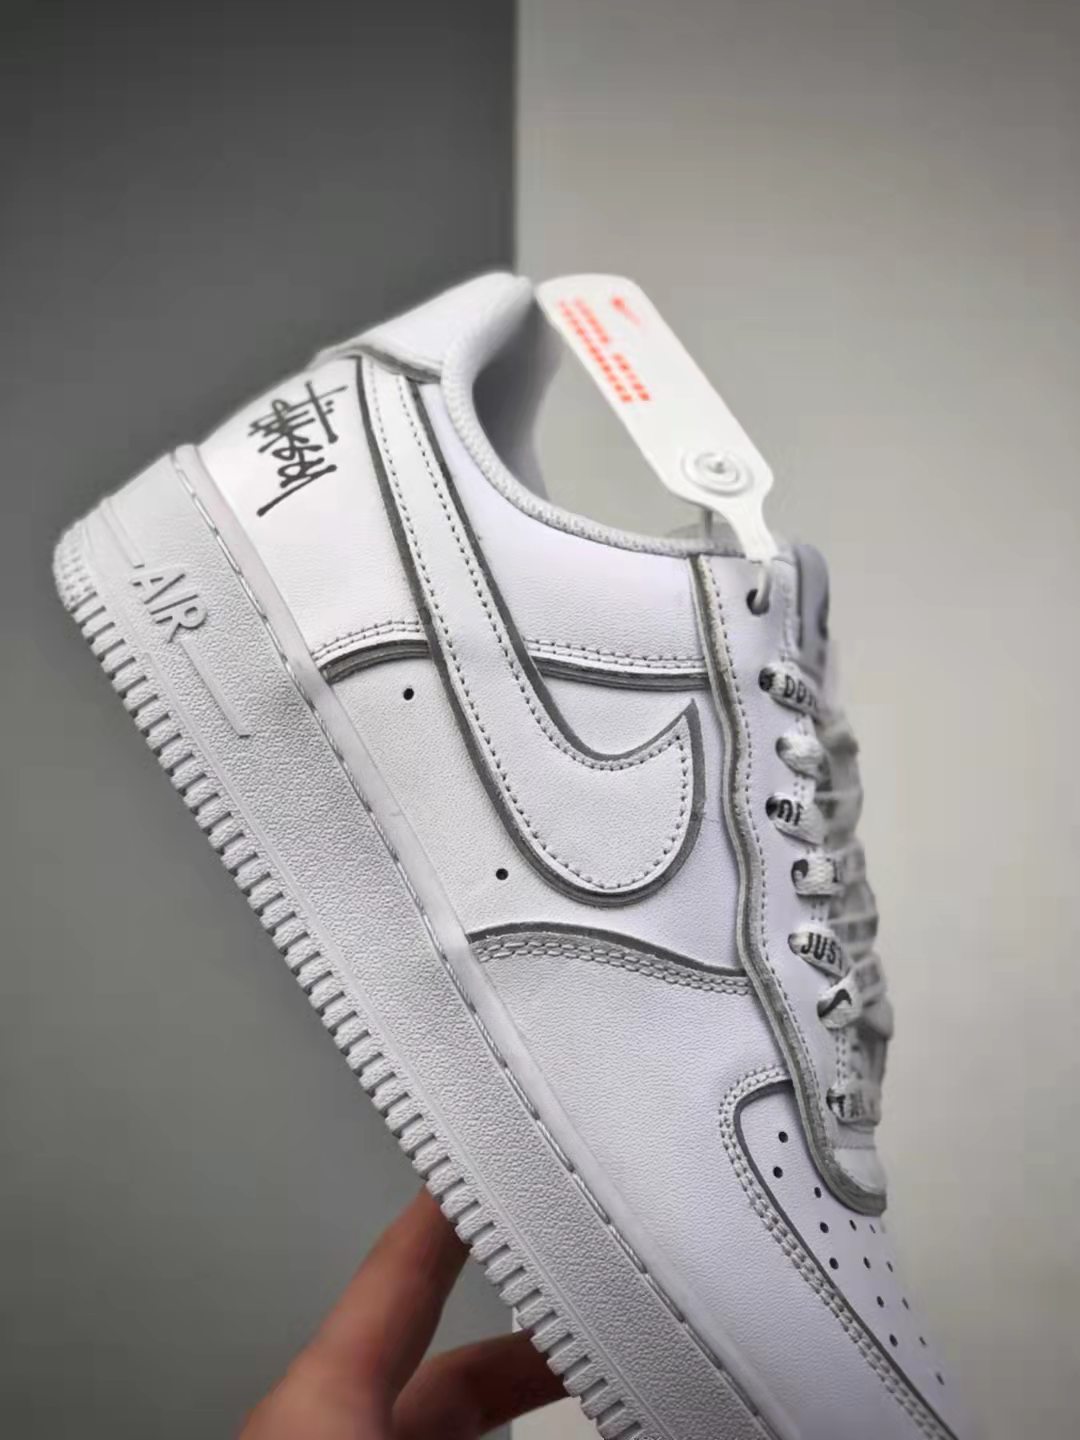 Nike Air Force 1 Low Stussy White Silver Reflective BQ6246-019 - Latest Fashionable Sneakers for Men and Women